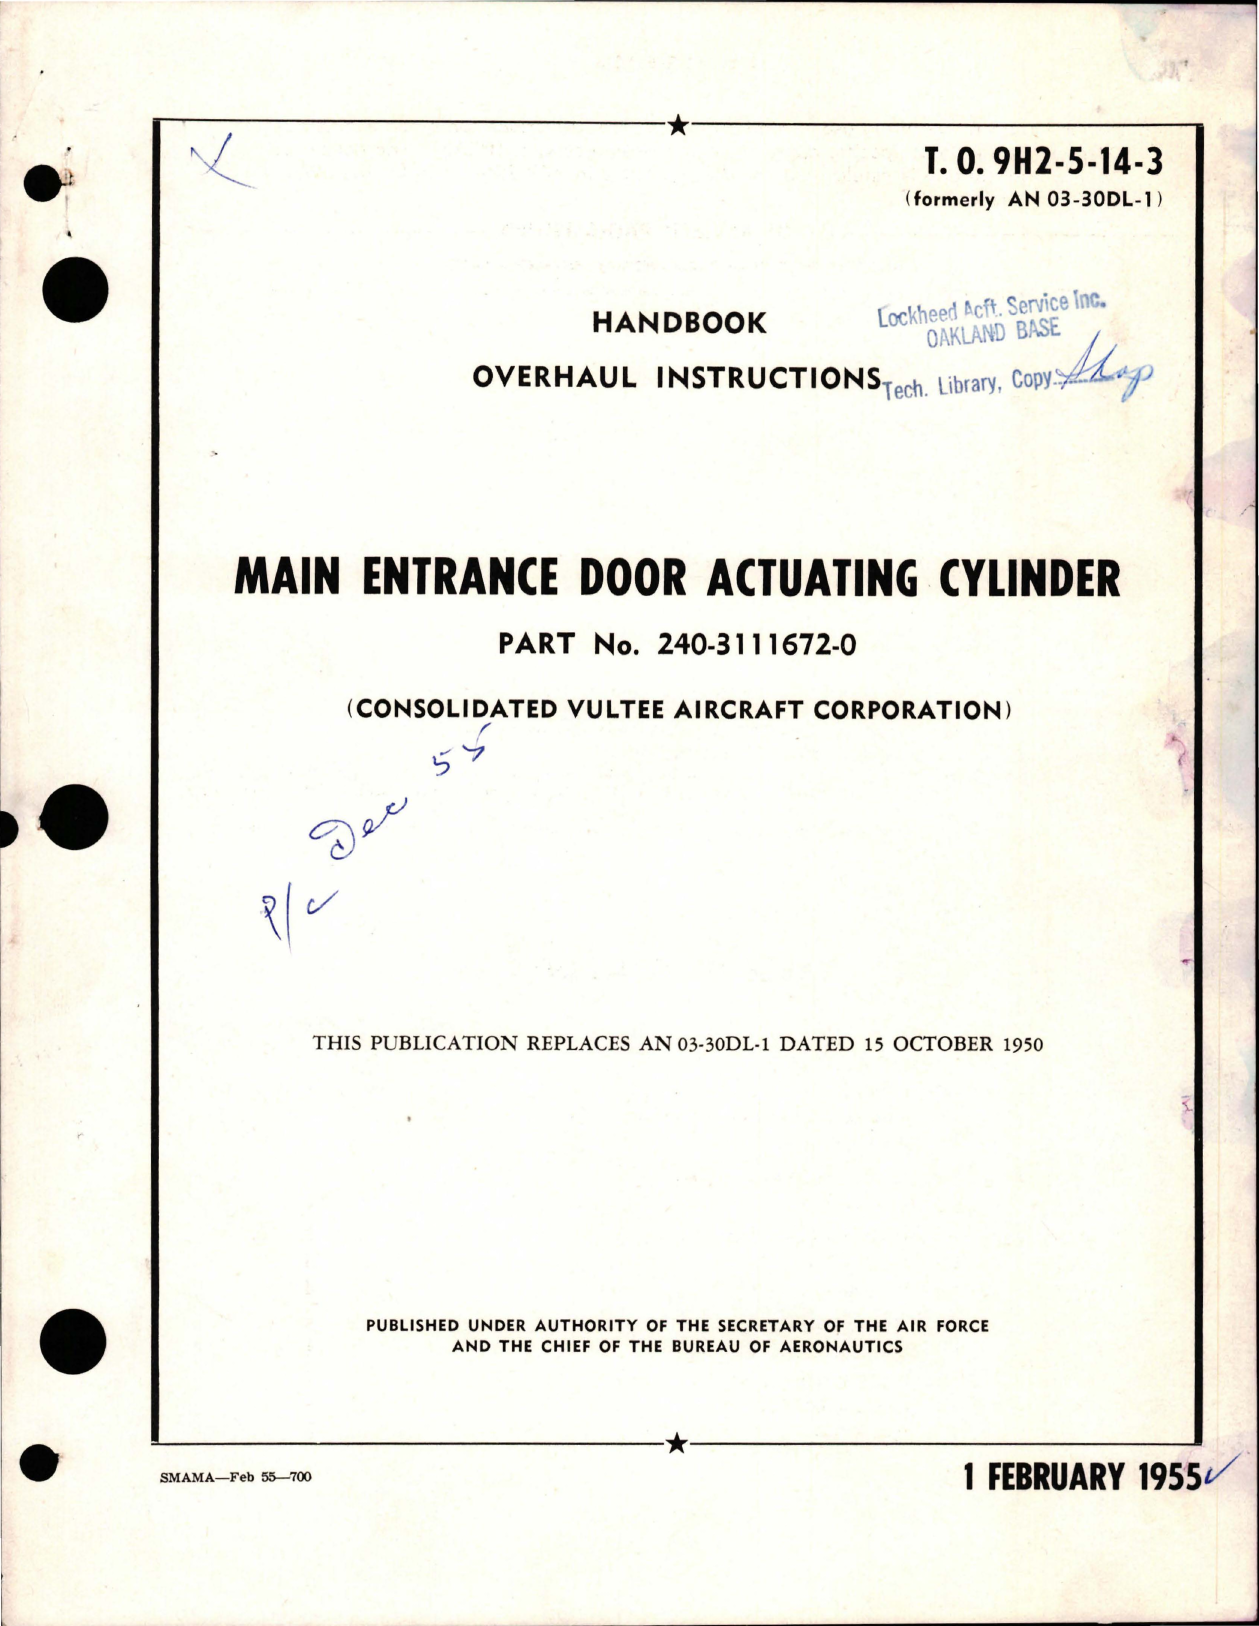 Sample page 1 from AirCorps Library document: Overhaul Instructions for Main Entrance Door Actuating Cylinder - Part 240-3111672-0